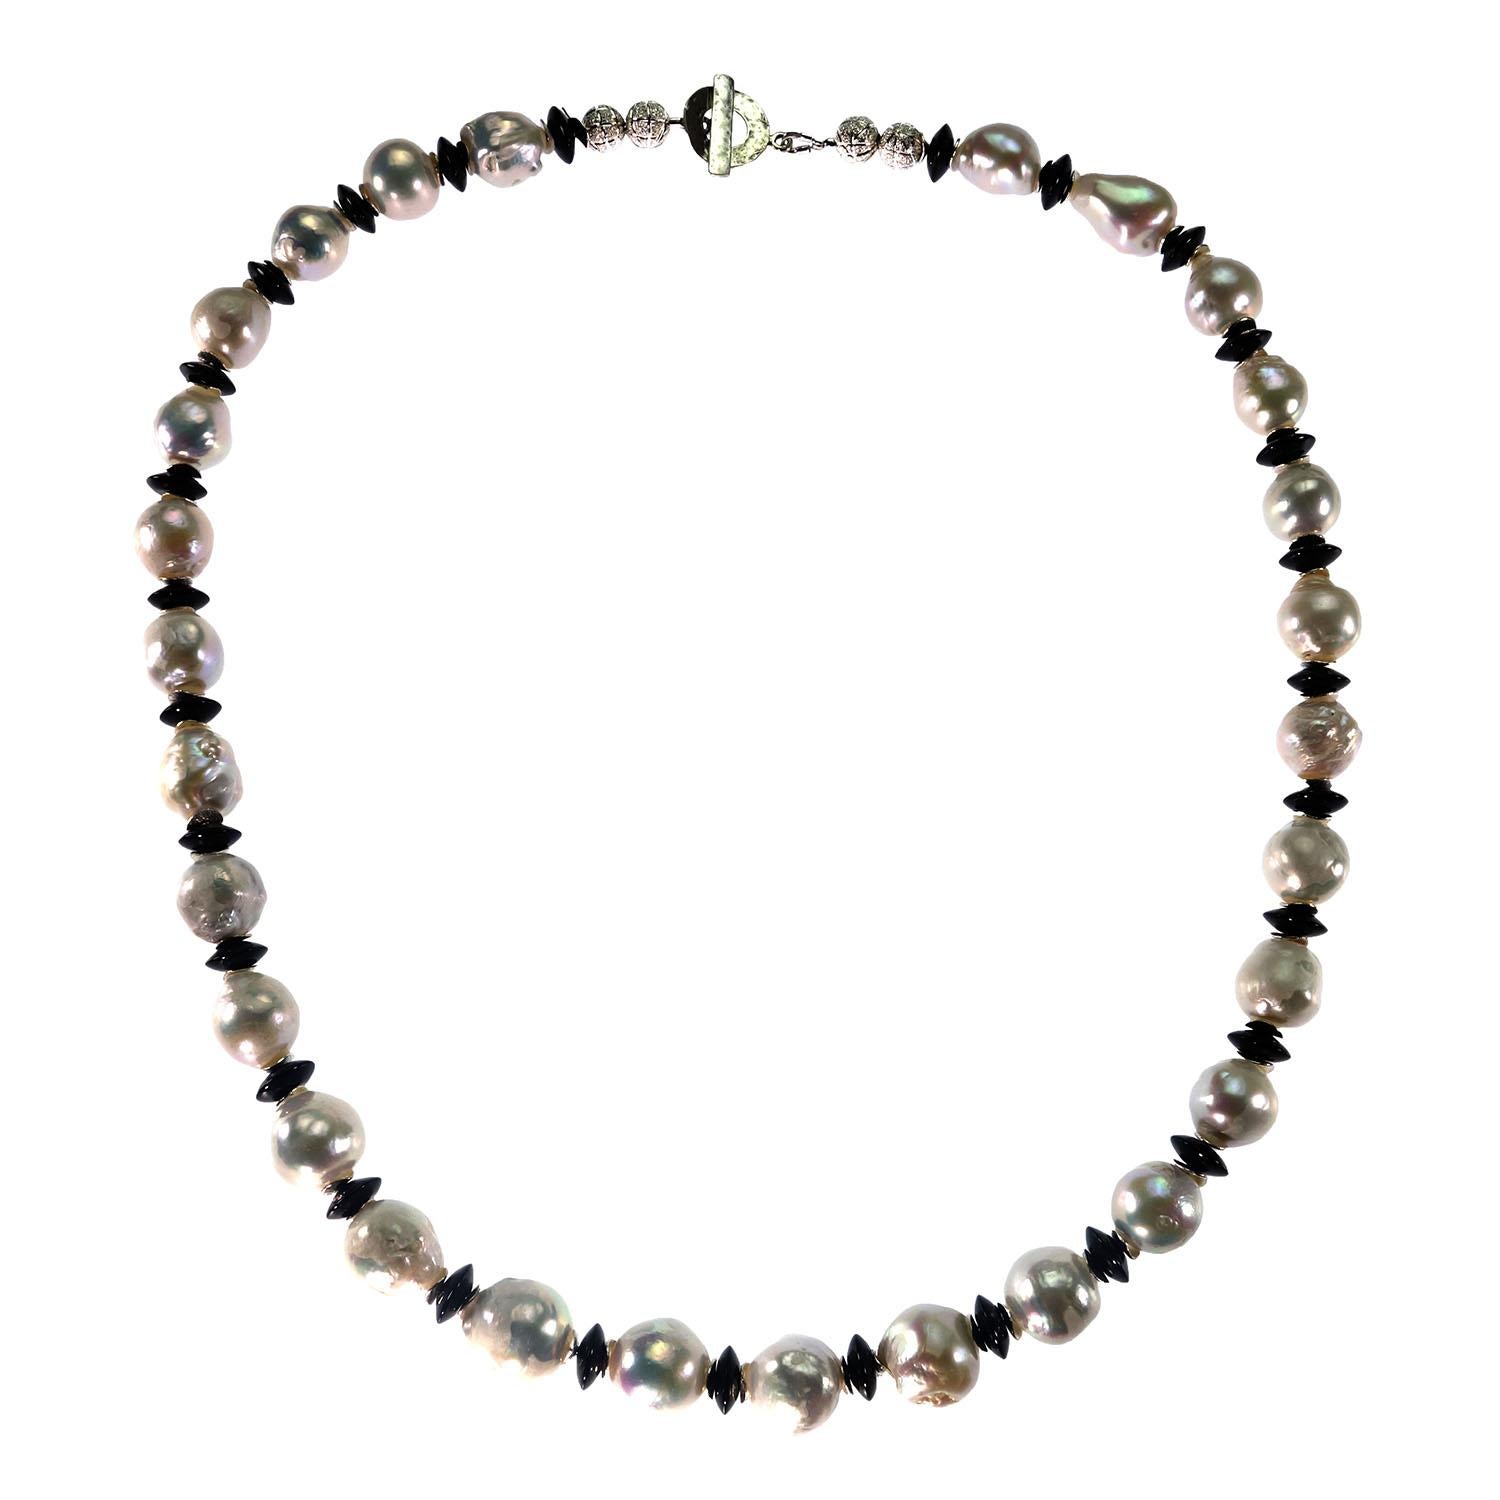 Women's or Men's AJD White Baroque Pearl Black Tourmaline Accents Necklace June Birthstone